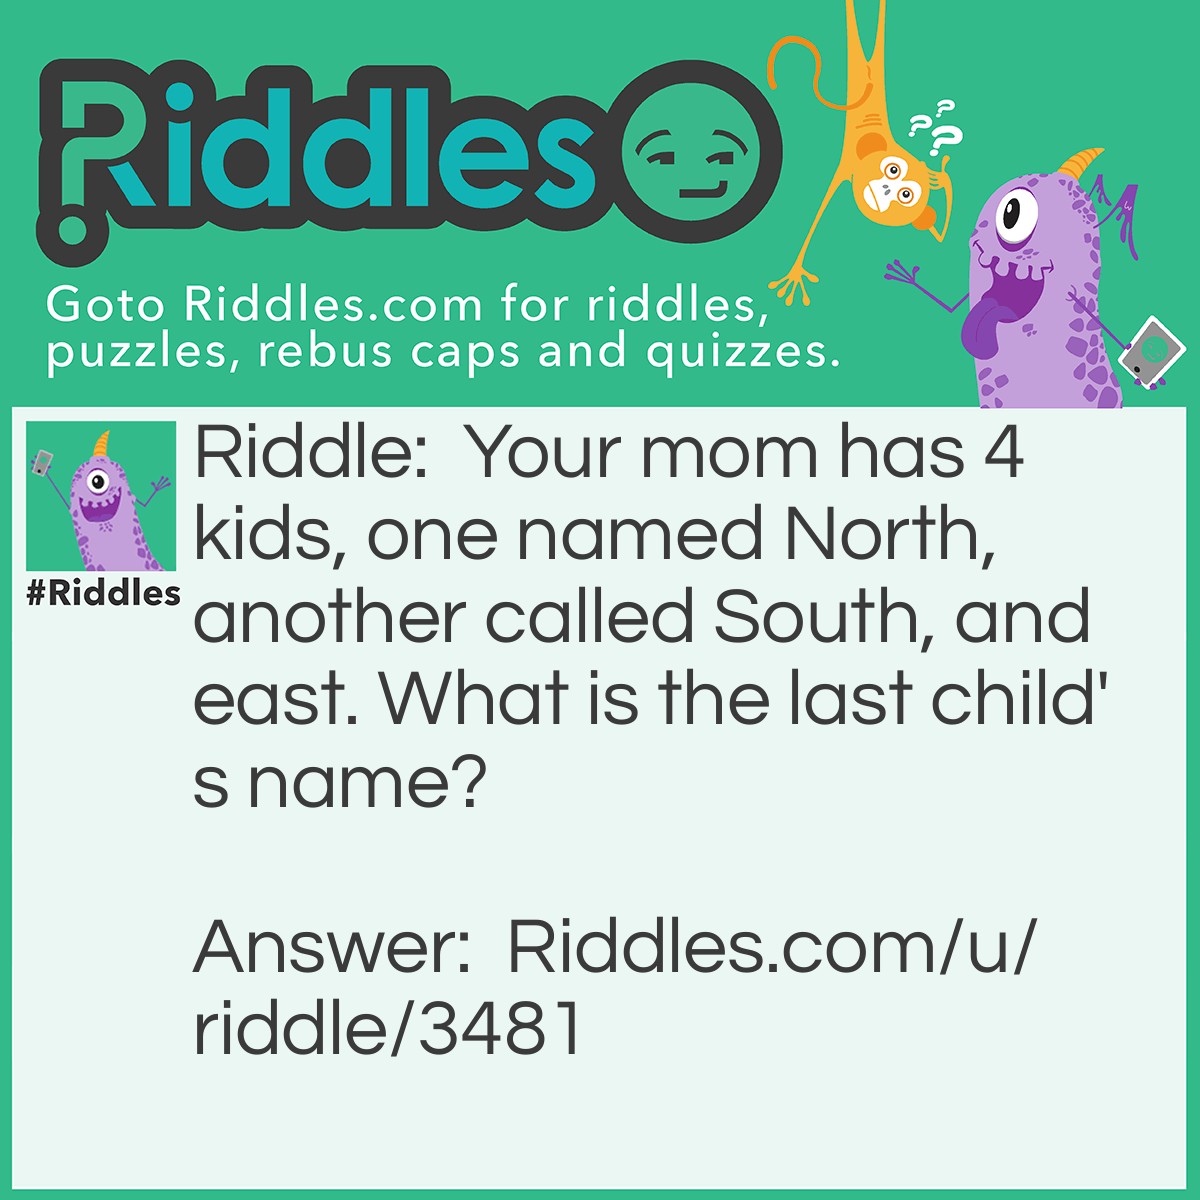 Riddle: Your mom has 4 kids, one named North, another called South, and one East. What is the last child's name? Answer: Your own name, it's your mom, you're part of the 4 children!